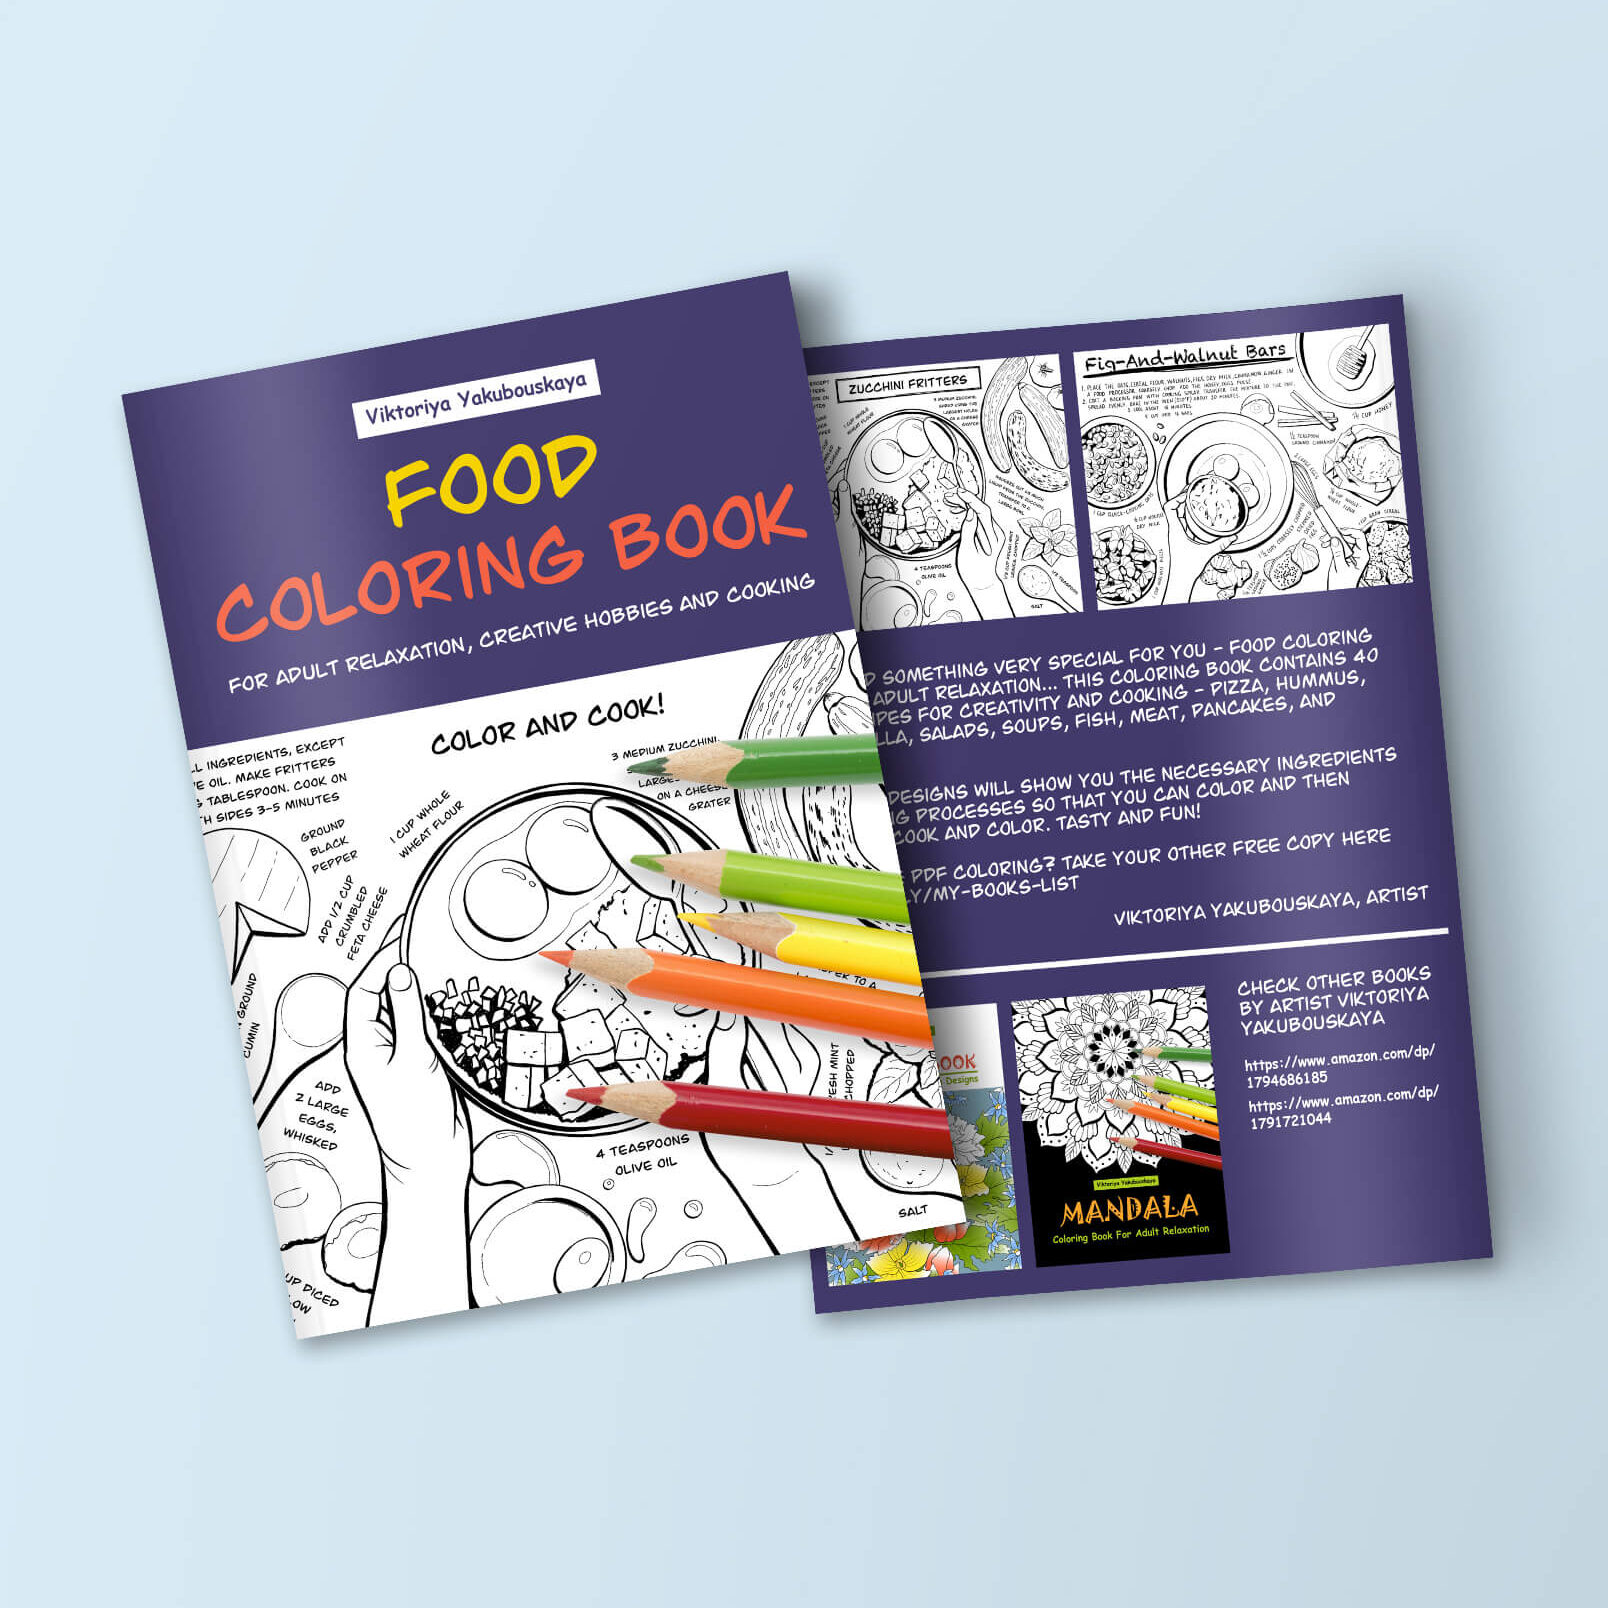 Food Coloring Book Covers Blog